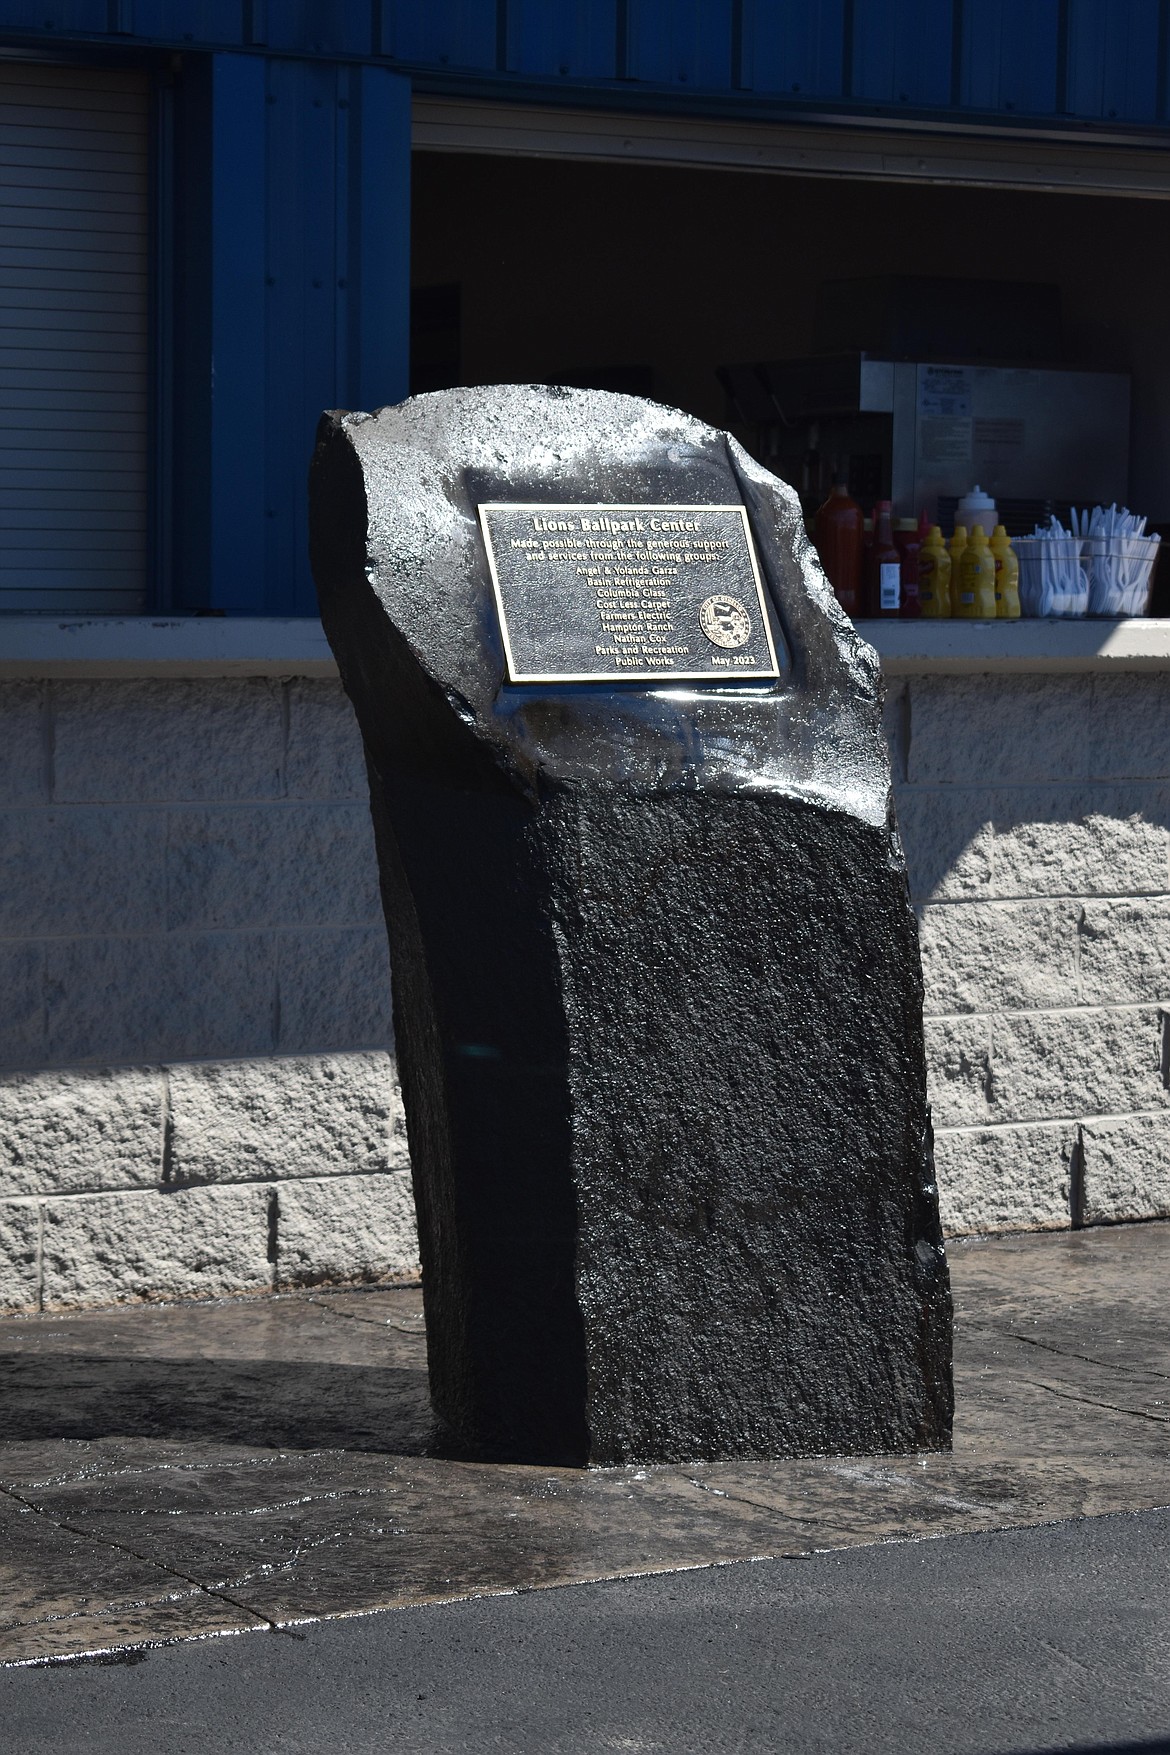 A plaque was placed in front of the concession stand, dedicated to individuals and donors for the renovation of Lions Park.